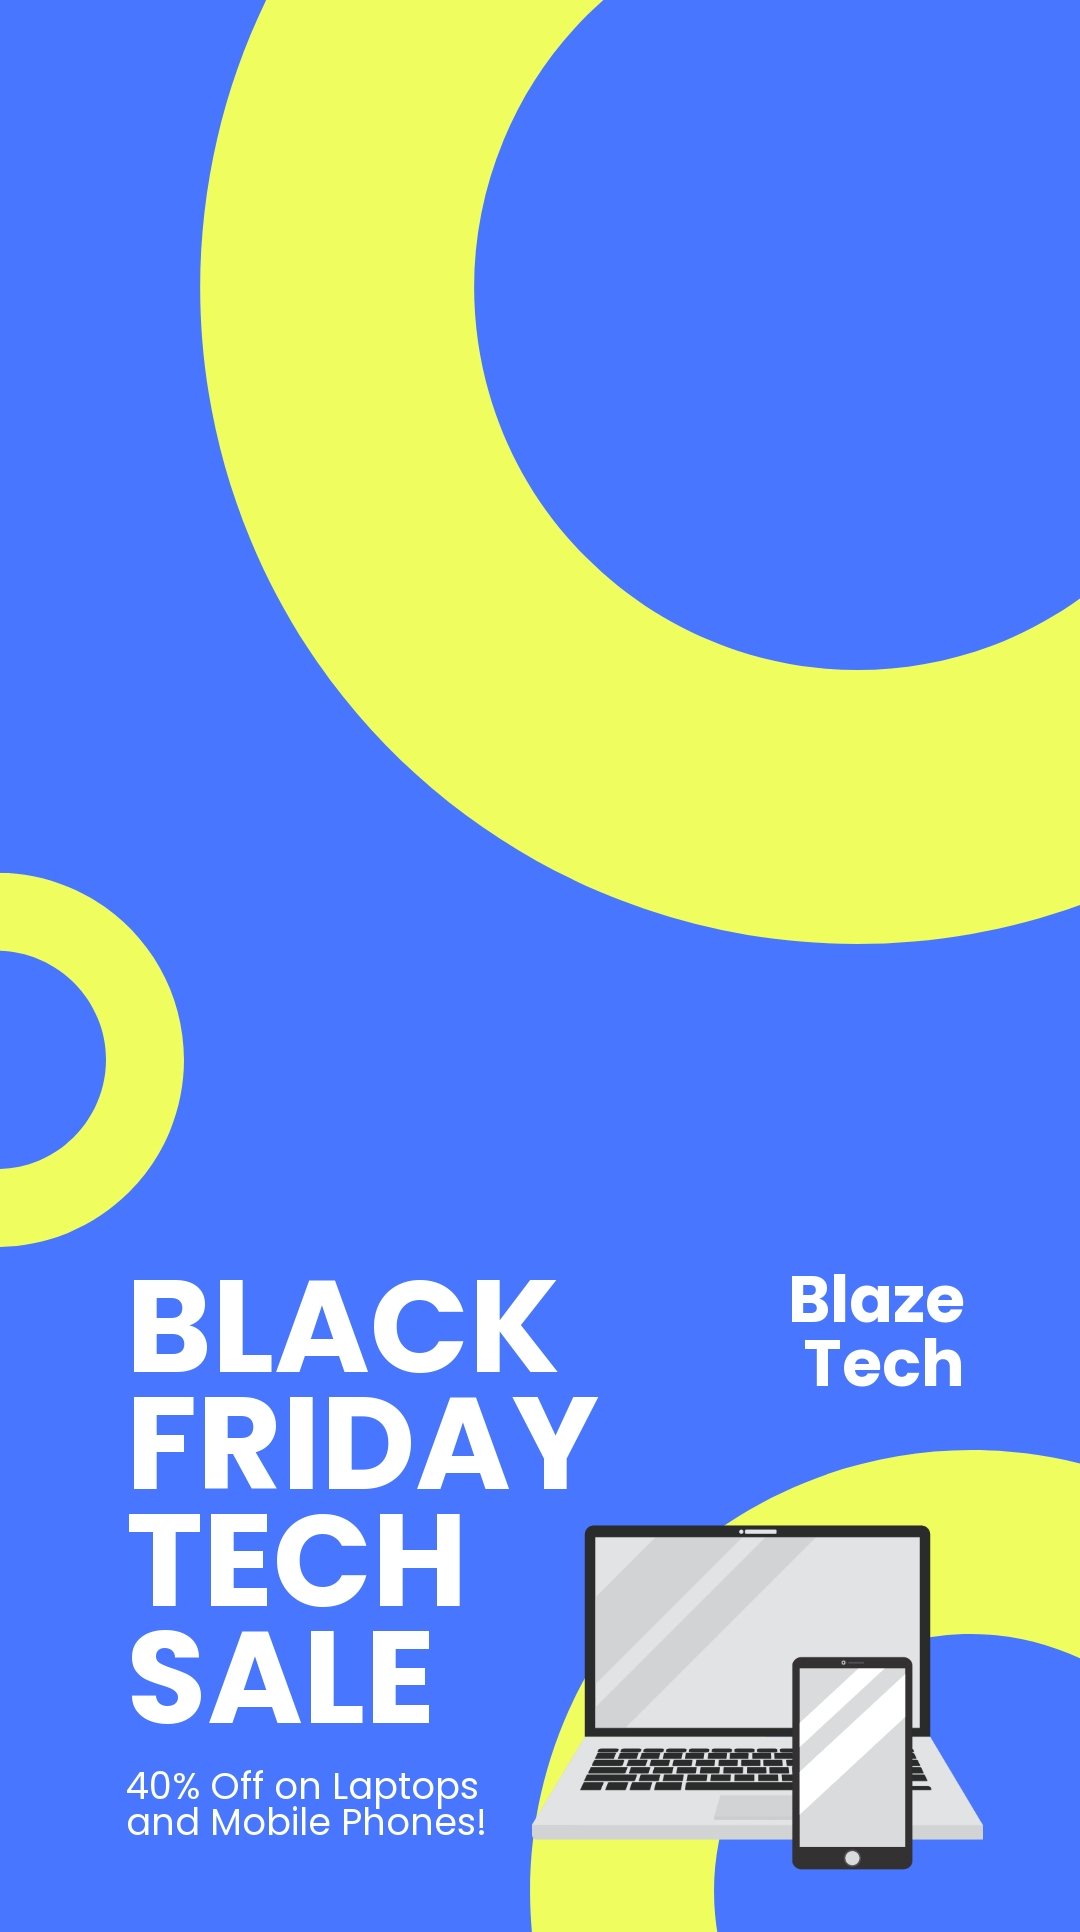 Black Friday Tech Sale Snapchat Geofilter Template